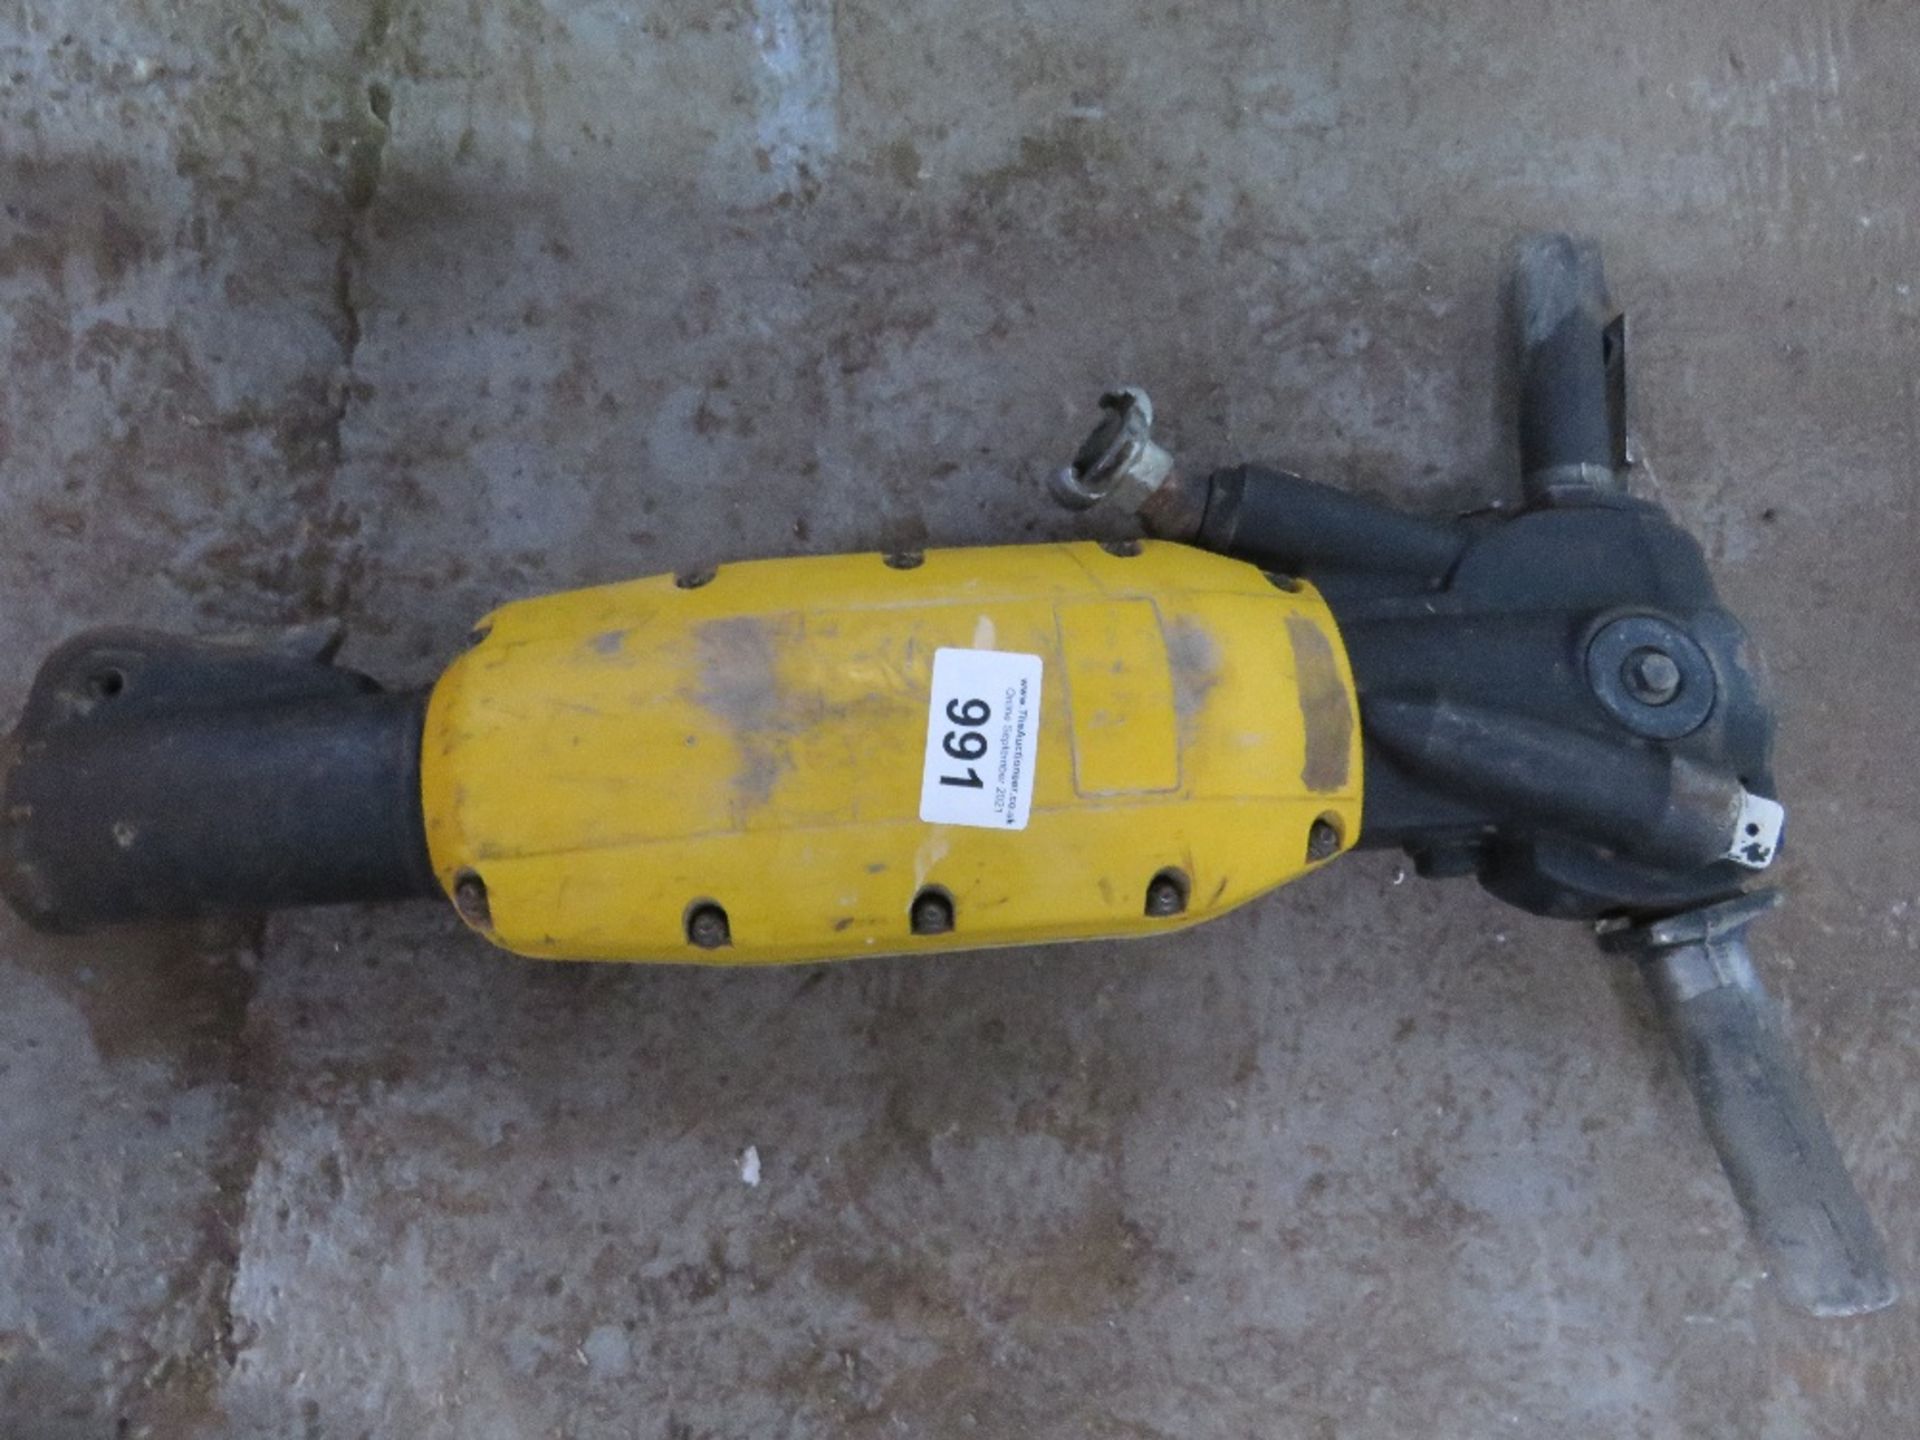 ATLAS COPCO ANTI VIBE AIR BREAKER, SURPLUS TO REQUIREMENTS, WORKING WHEN IT WAS PUT IN STORAGE. NO